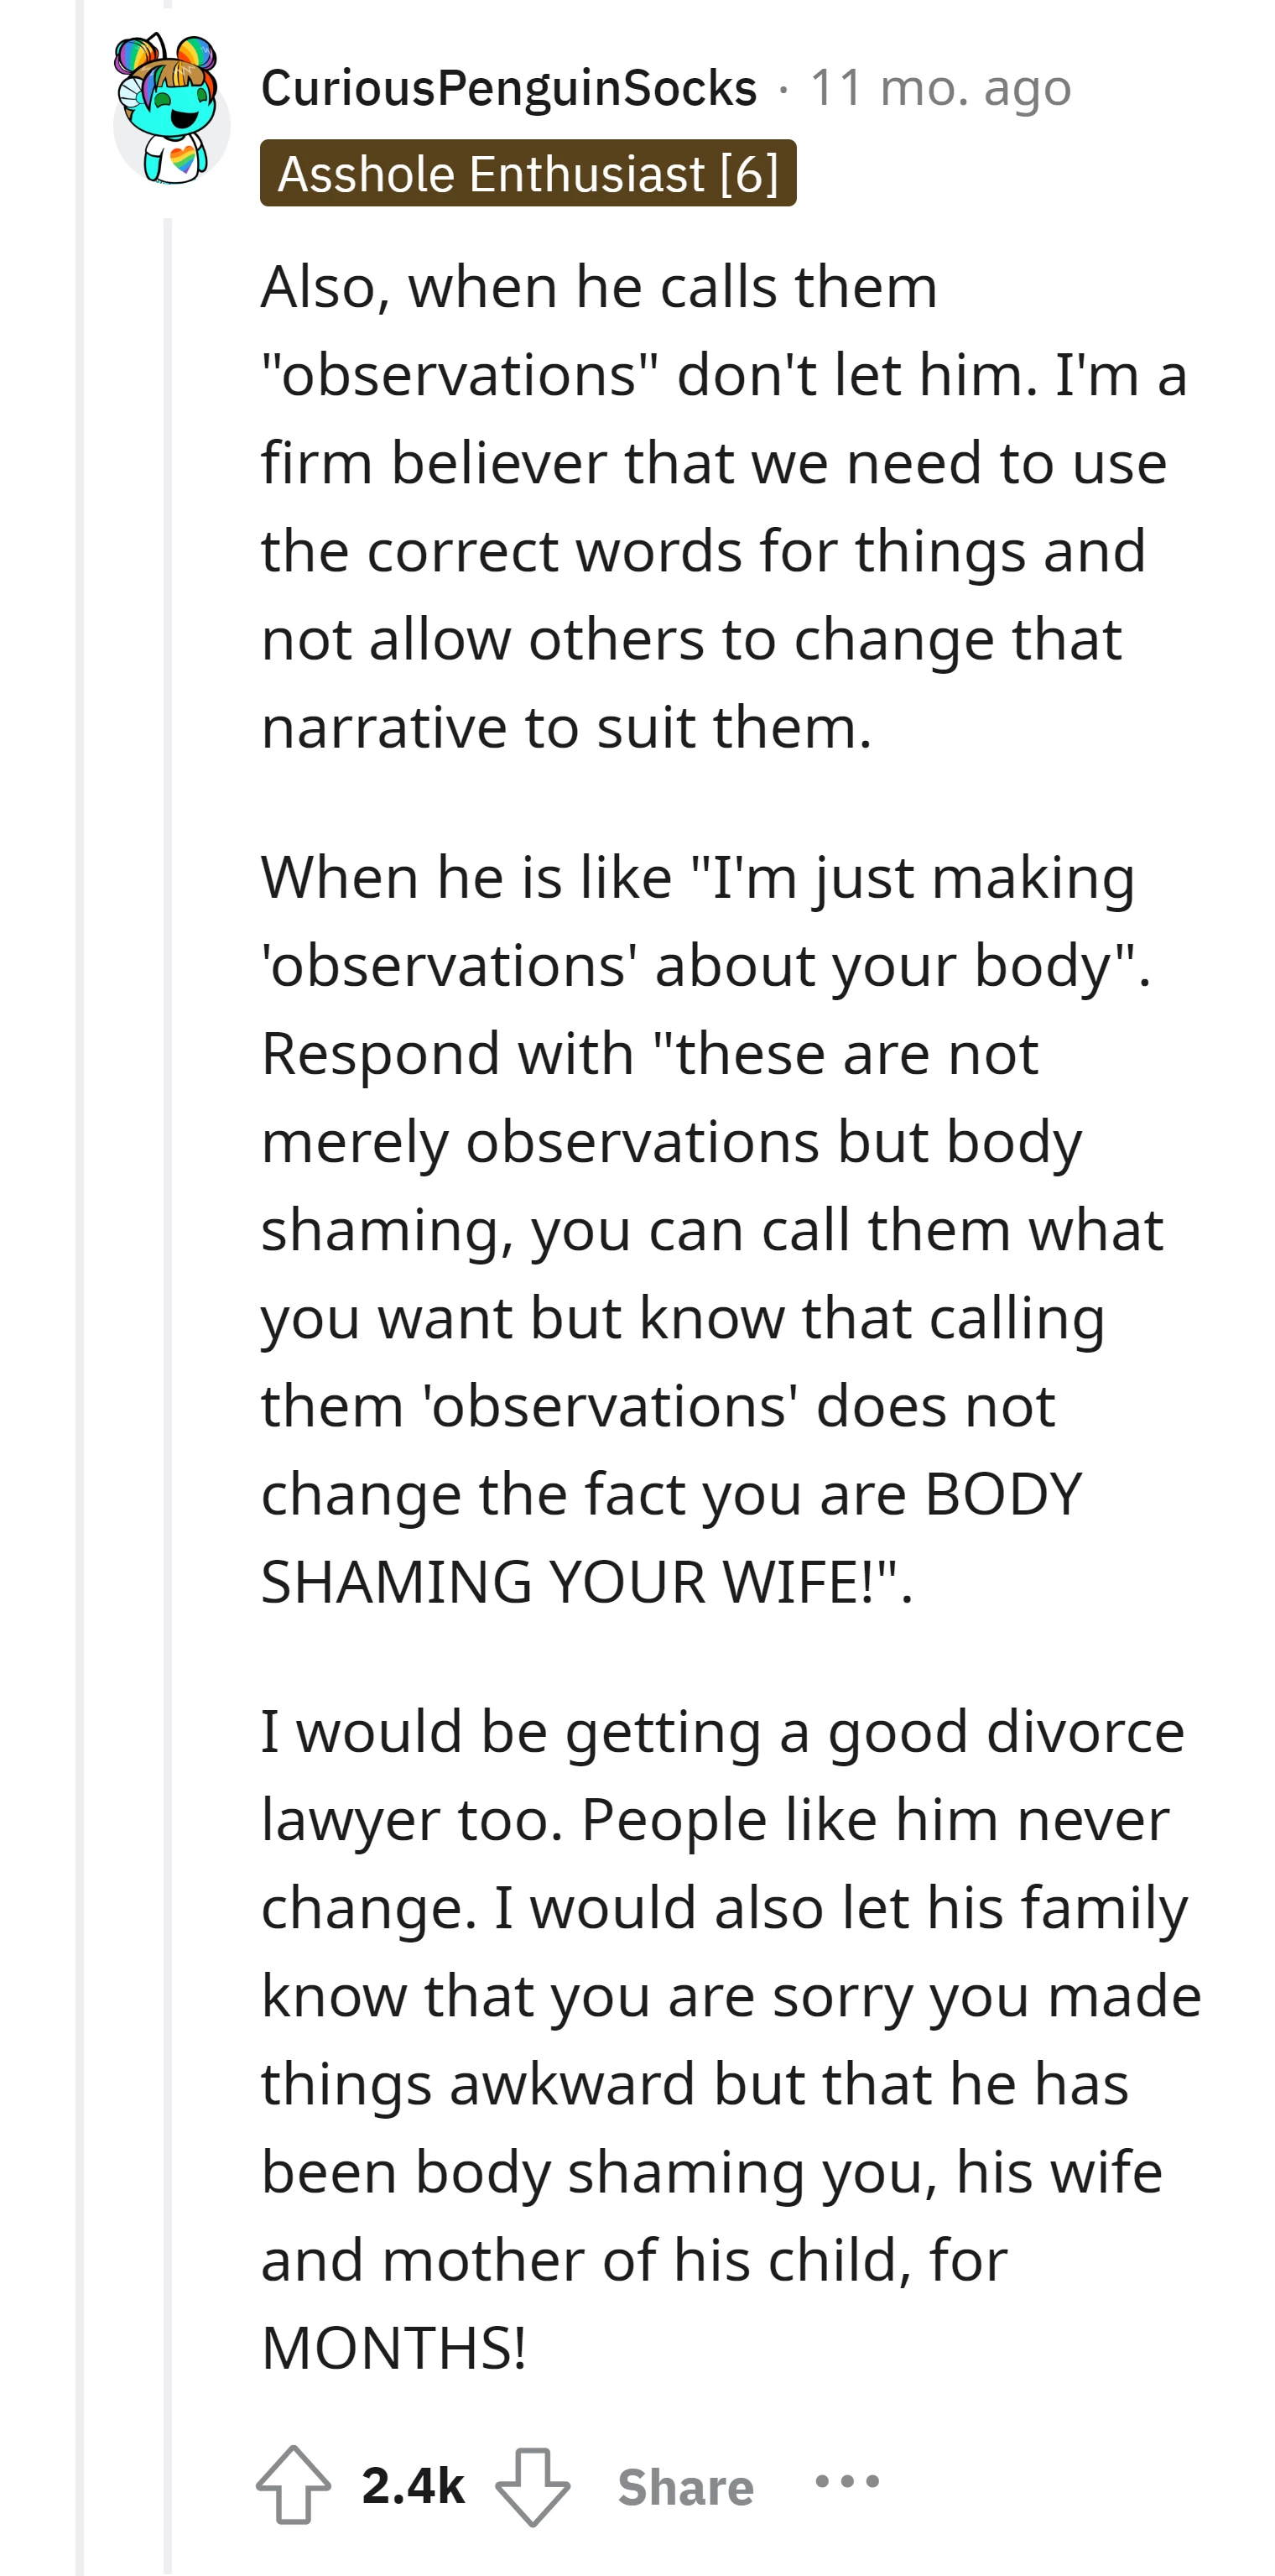 The commenter advises OP to consider divorce due to the persistent nature of such behavior